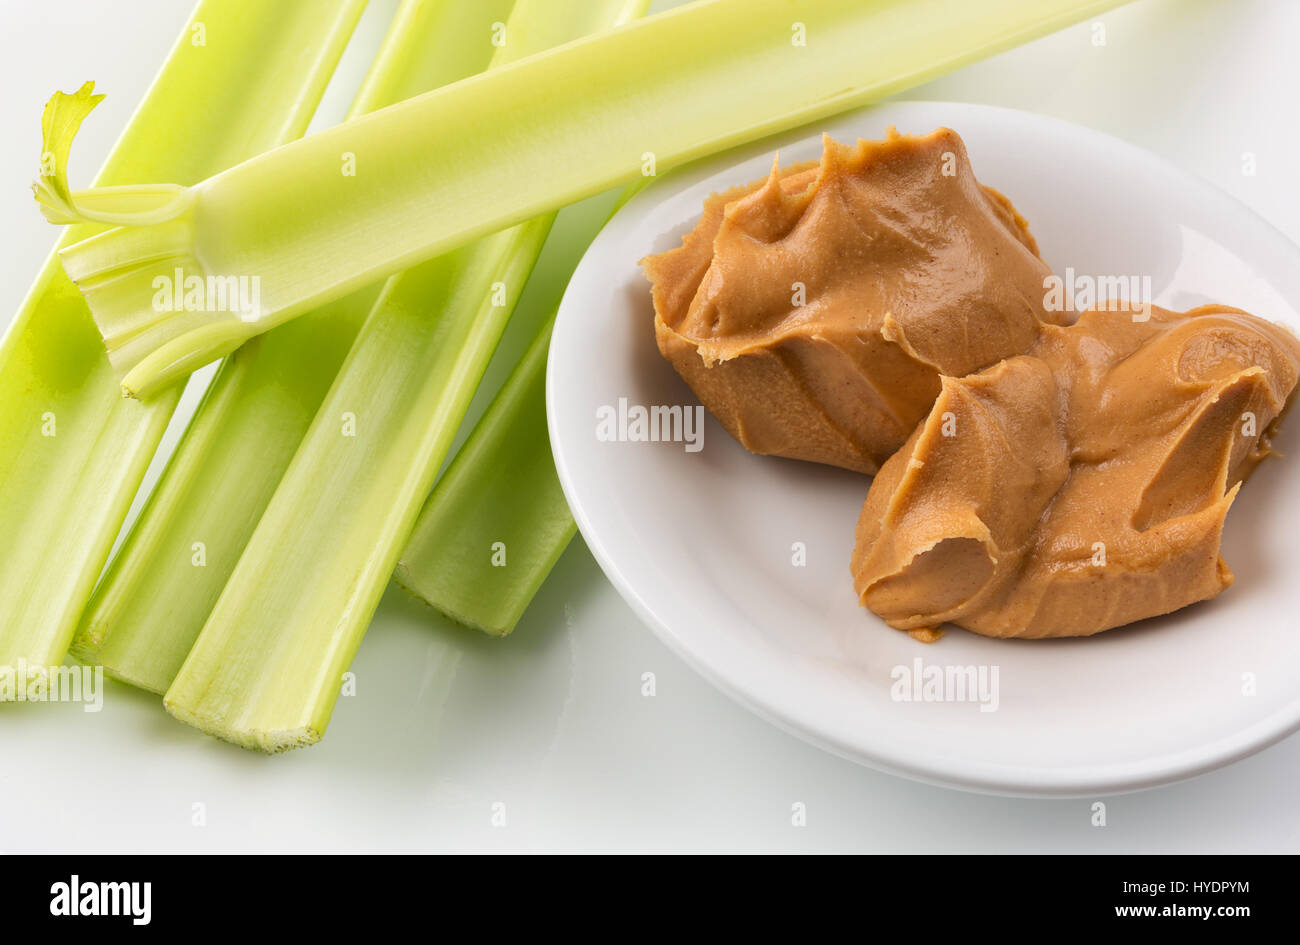 Close view of celery stalks with a bowl of peanut butter on a white plate. Stock Photo